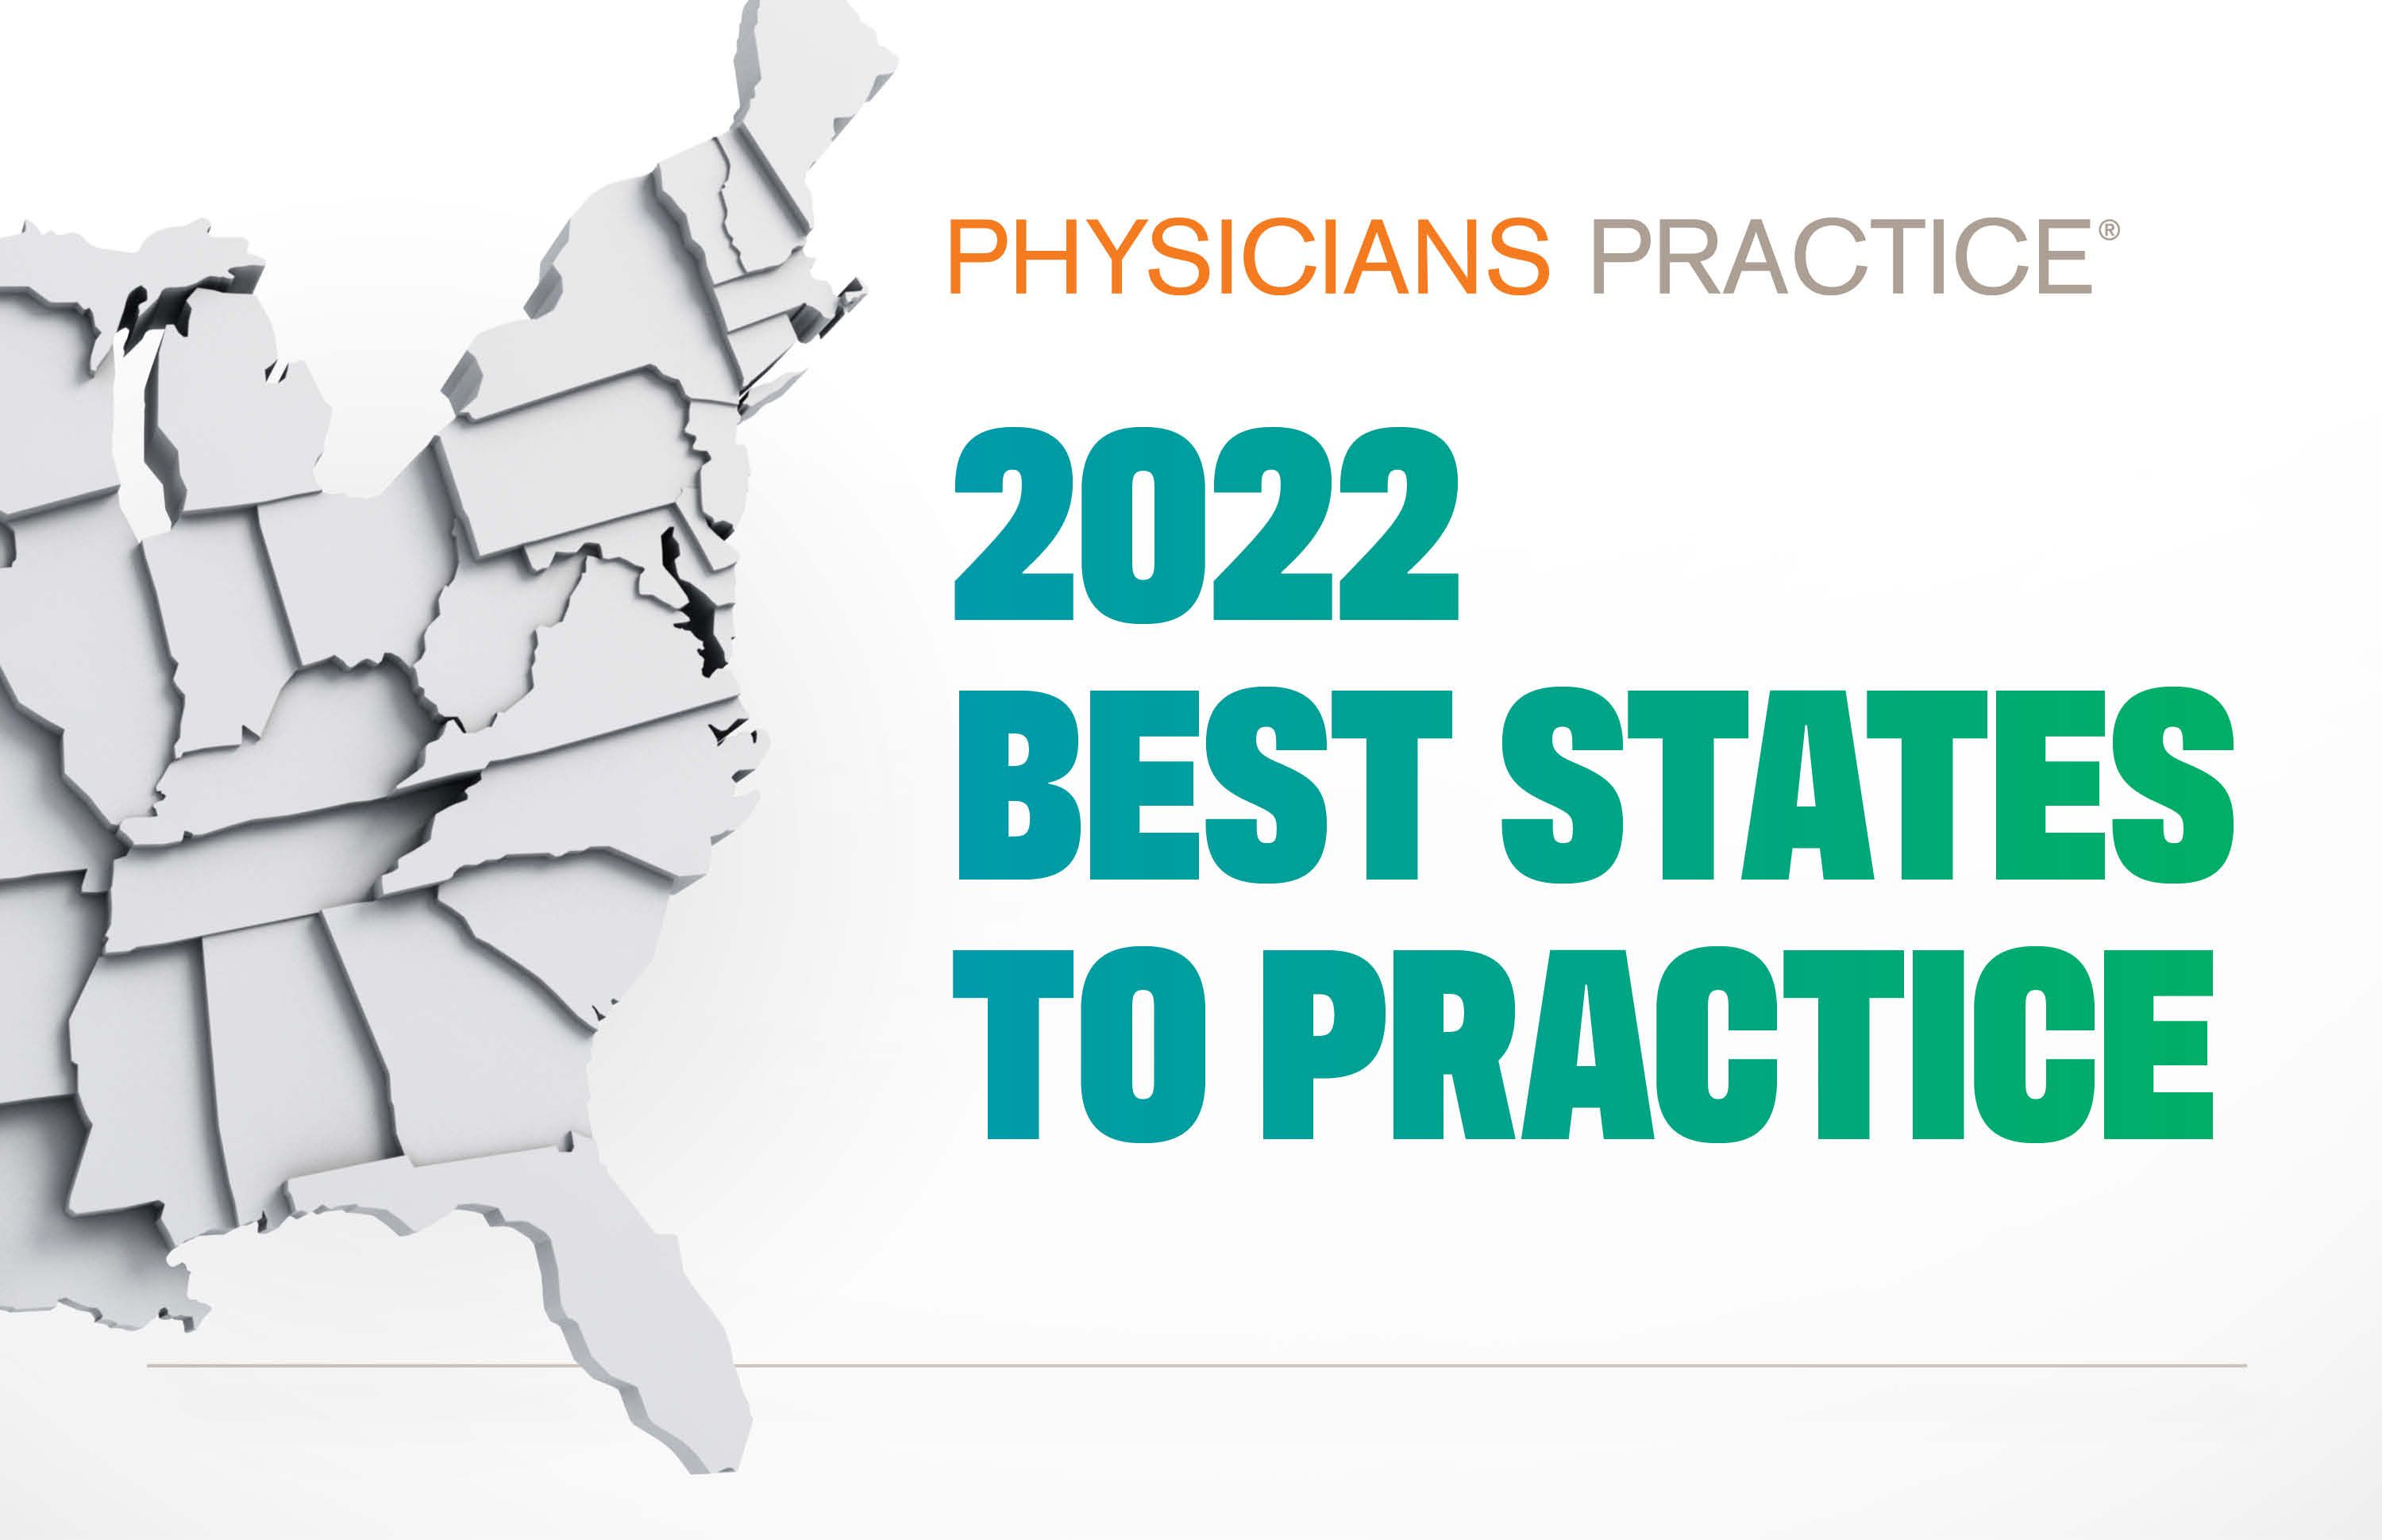 7 States with the most physicians 2022